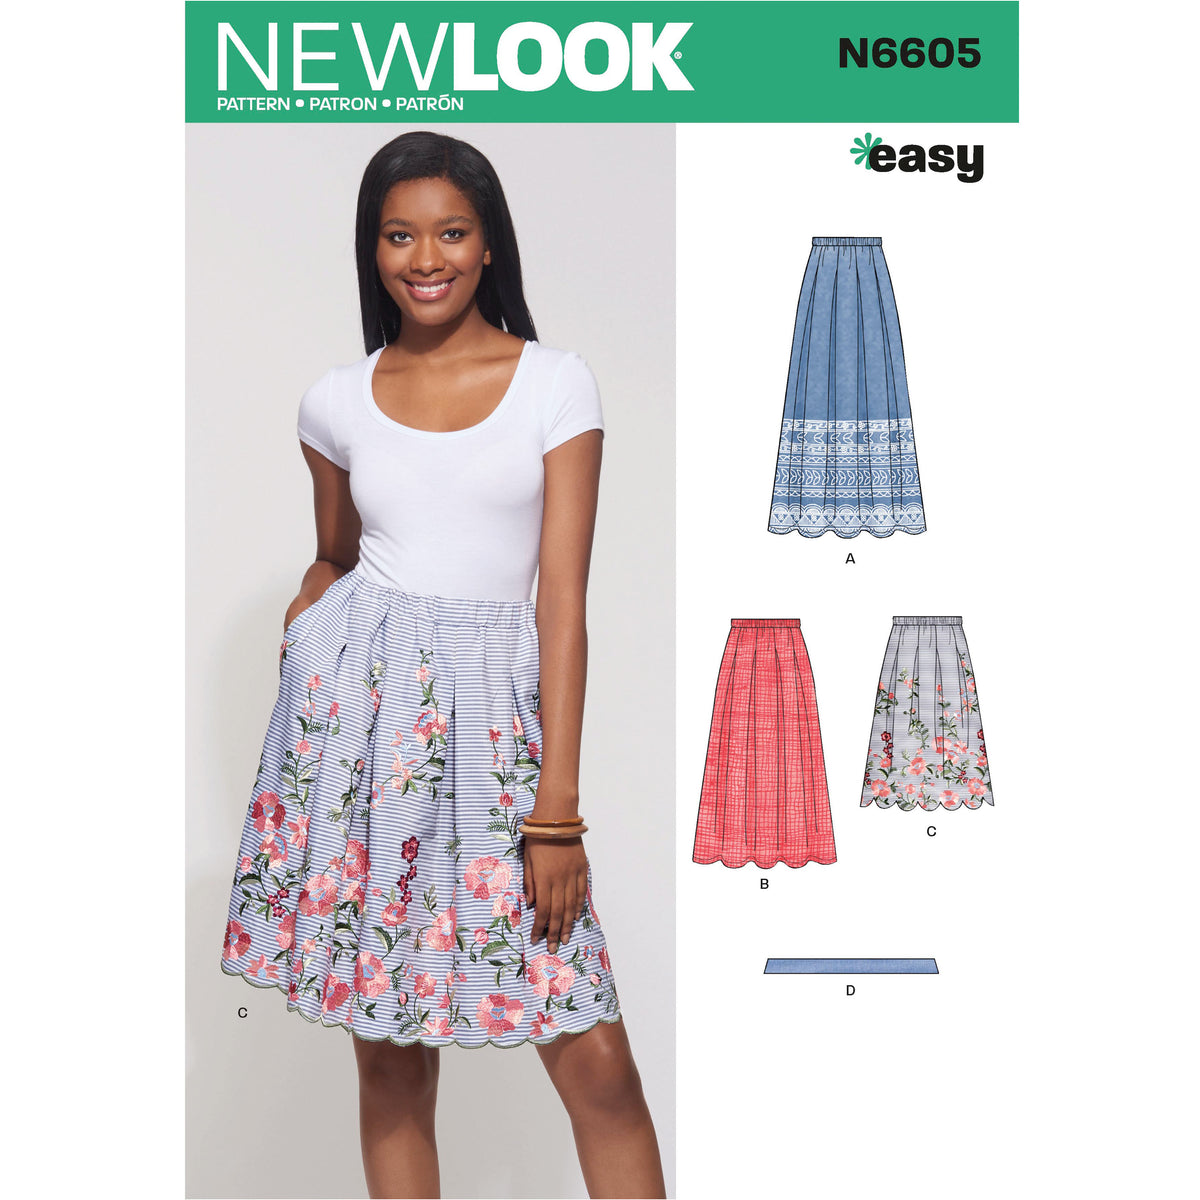 New Look Sewing Pattern N6605 - Misses' Skirt with Neck Tie – My Sewing Box